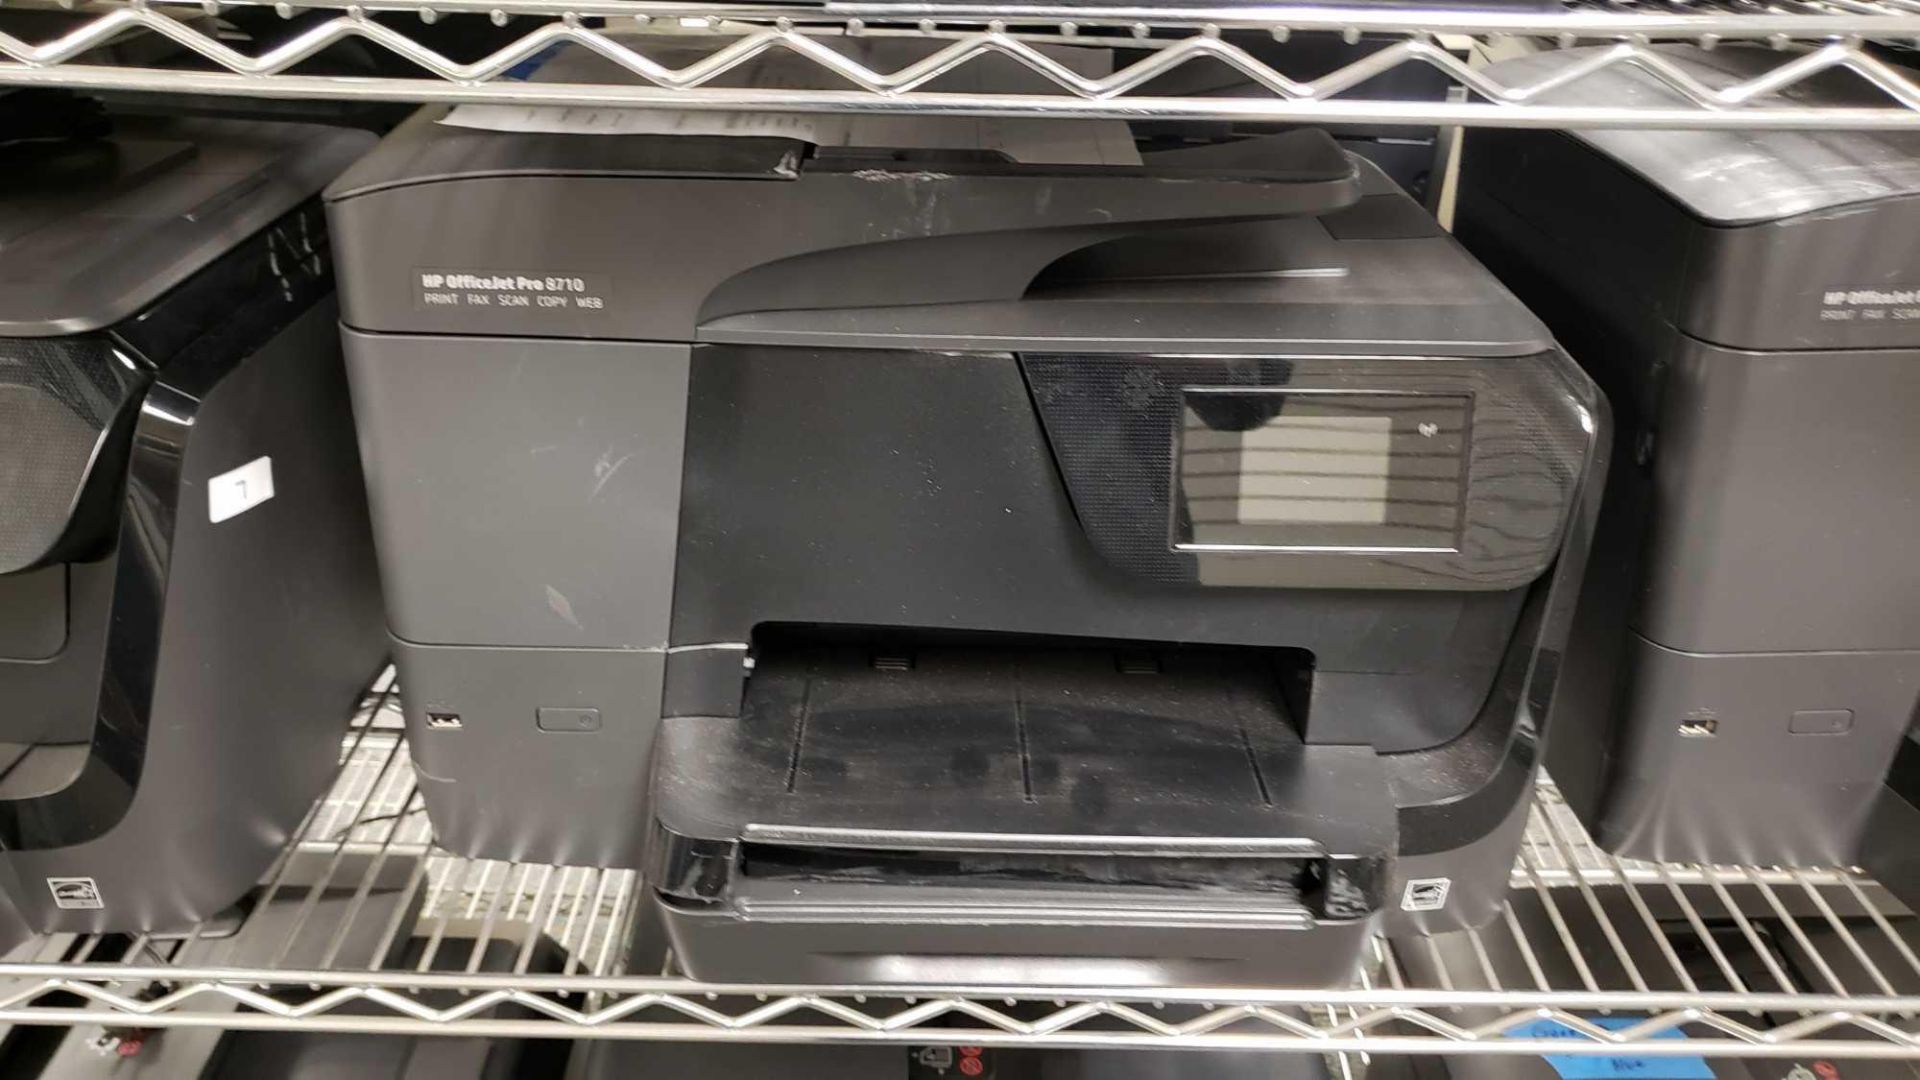 Lot of (3) HP Officejet Pro 8710 Printers - Image 3 of 3